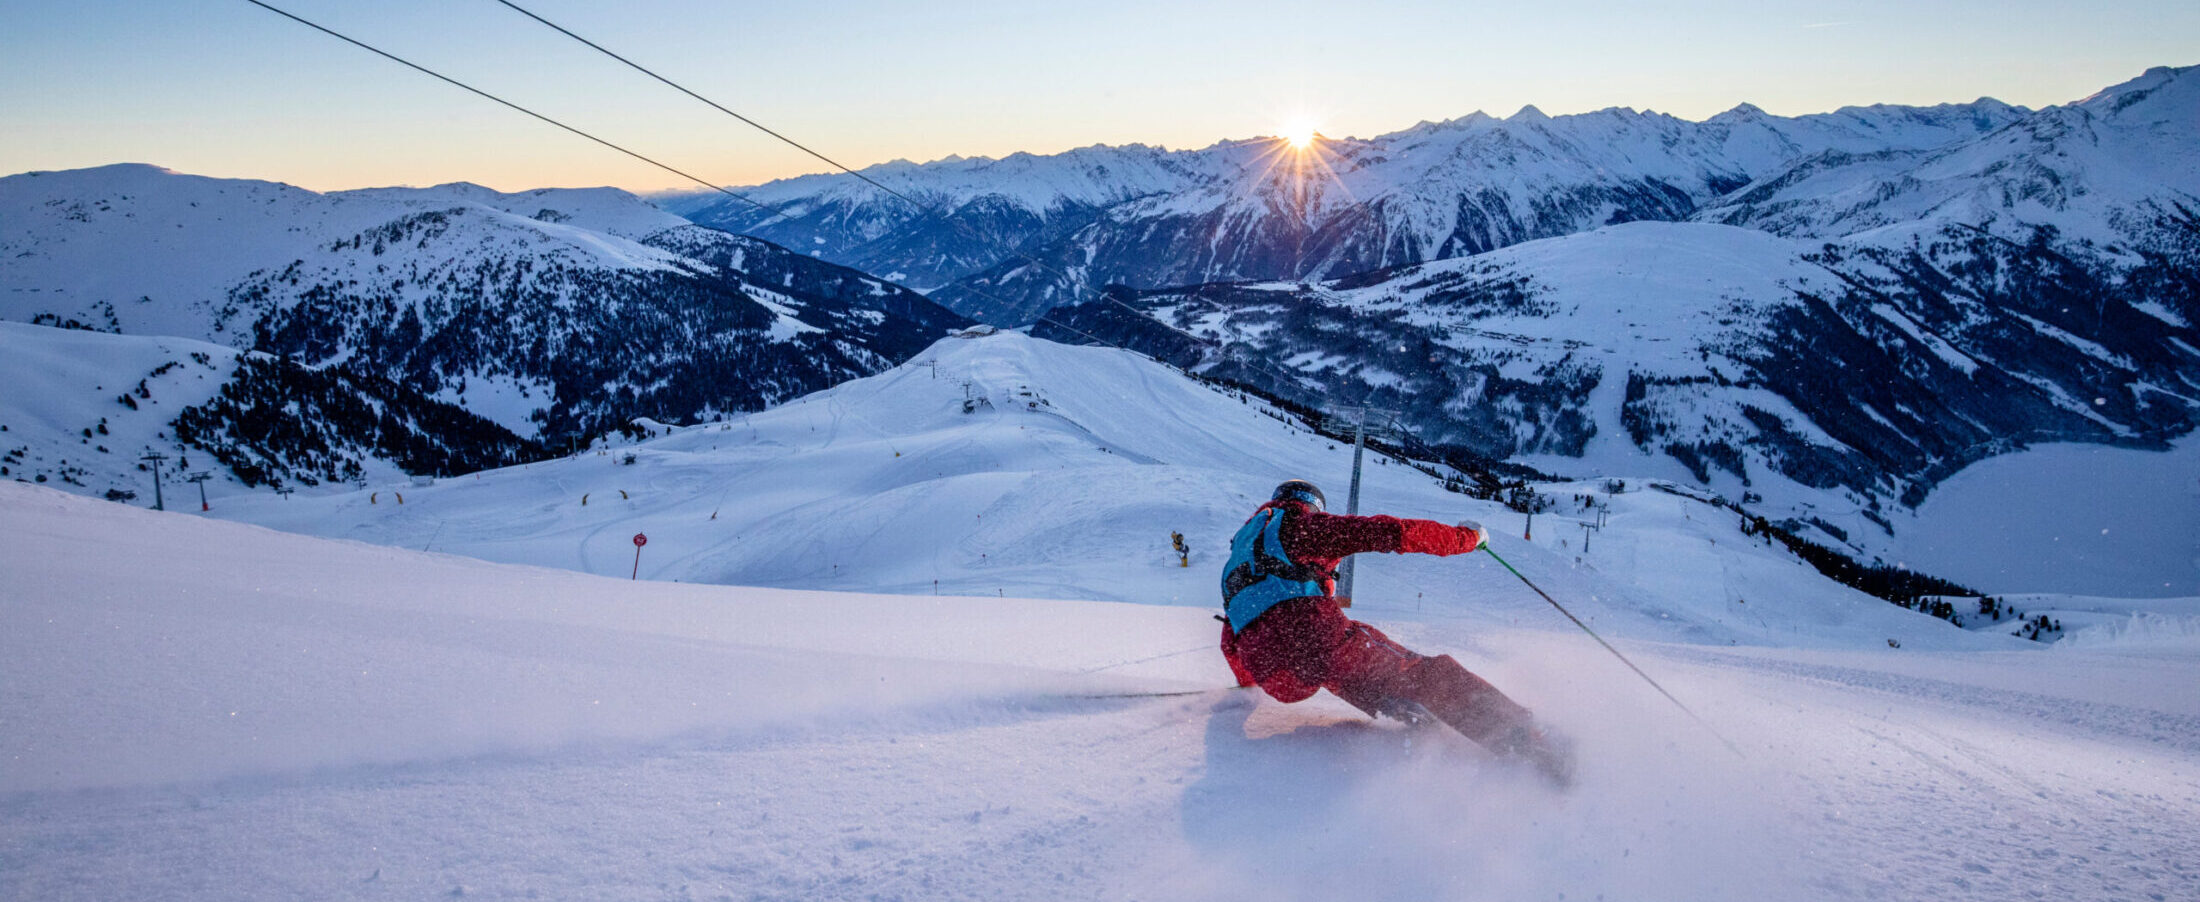 Alpin Luxe Ski Vacations - Skier in the Dolomites at last light